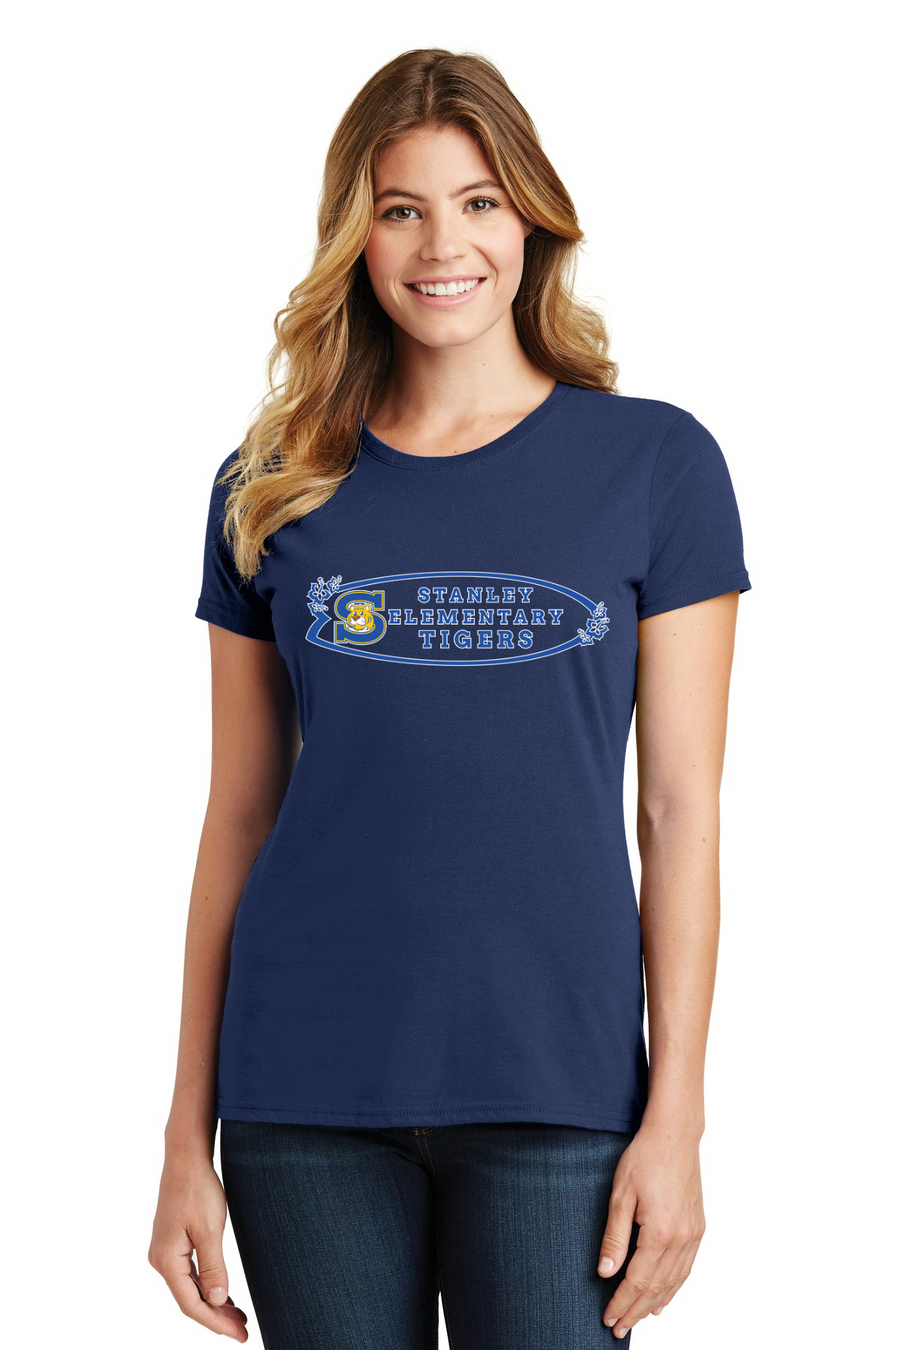 The Tiger Store - Stanley Elementary 2023/24 On-Demand-Port and Co Ladies Favorite Shirt Surf Board Logo